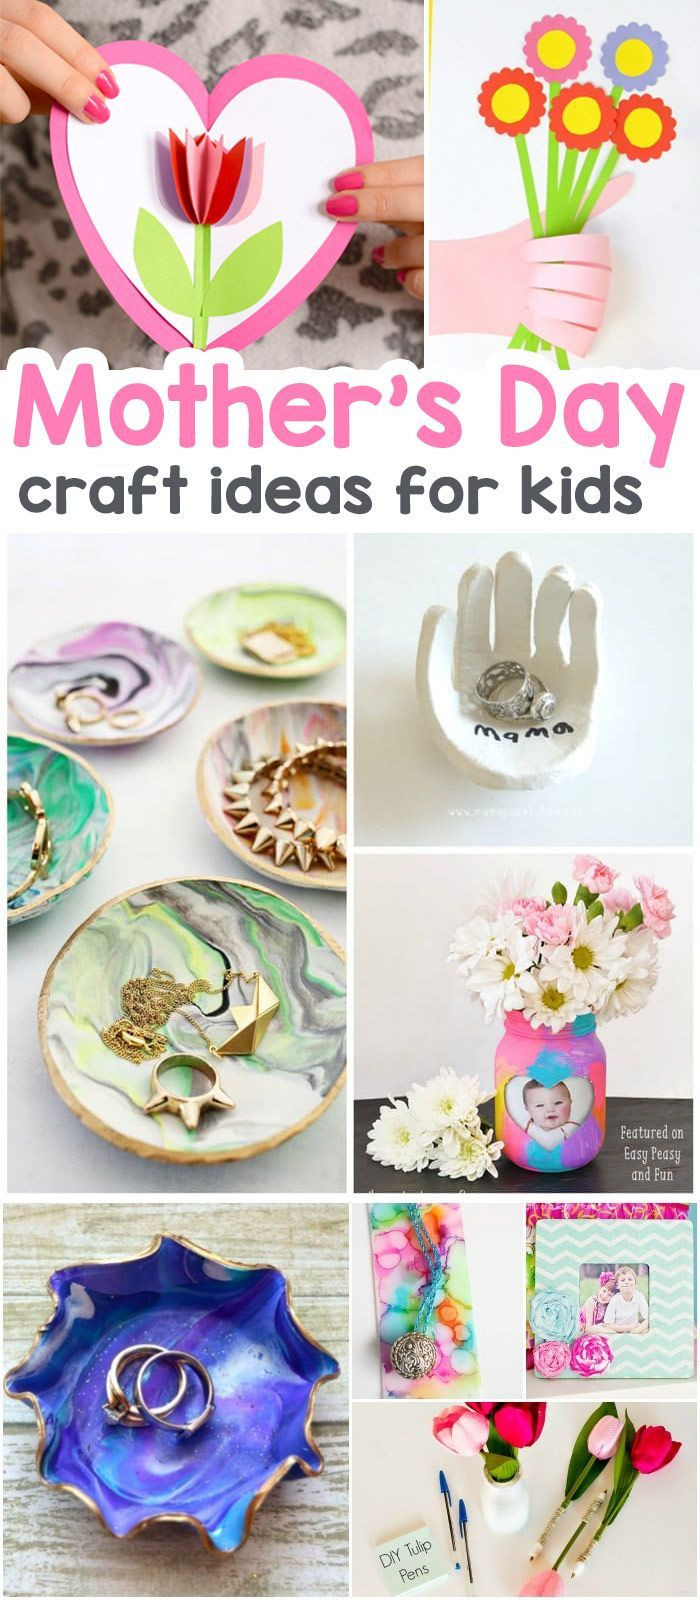 Arts And Crafts For Mother's Day
 25 Mothers Day Crafts for Kids – Most Wonderful Cards